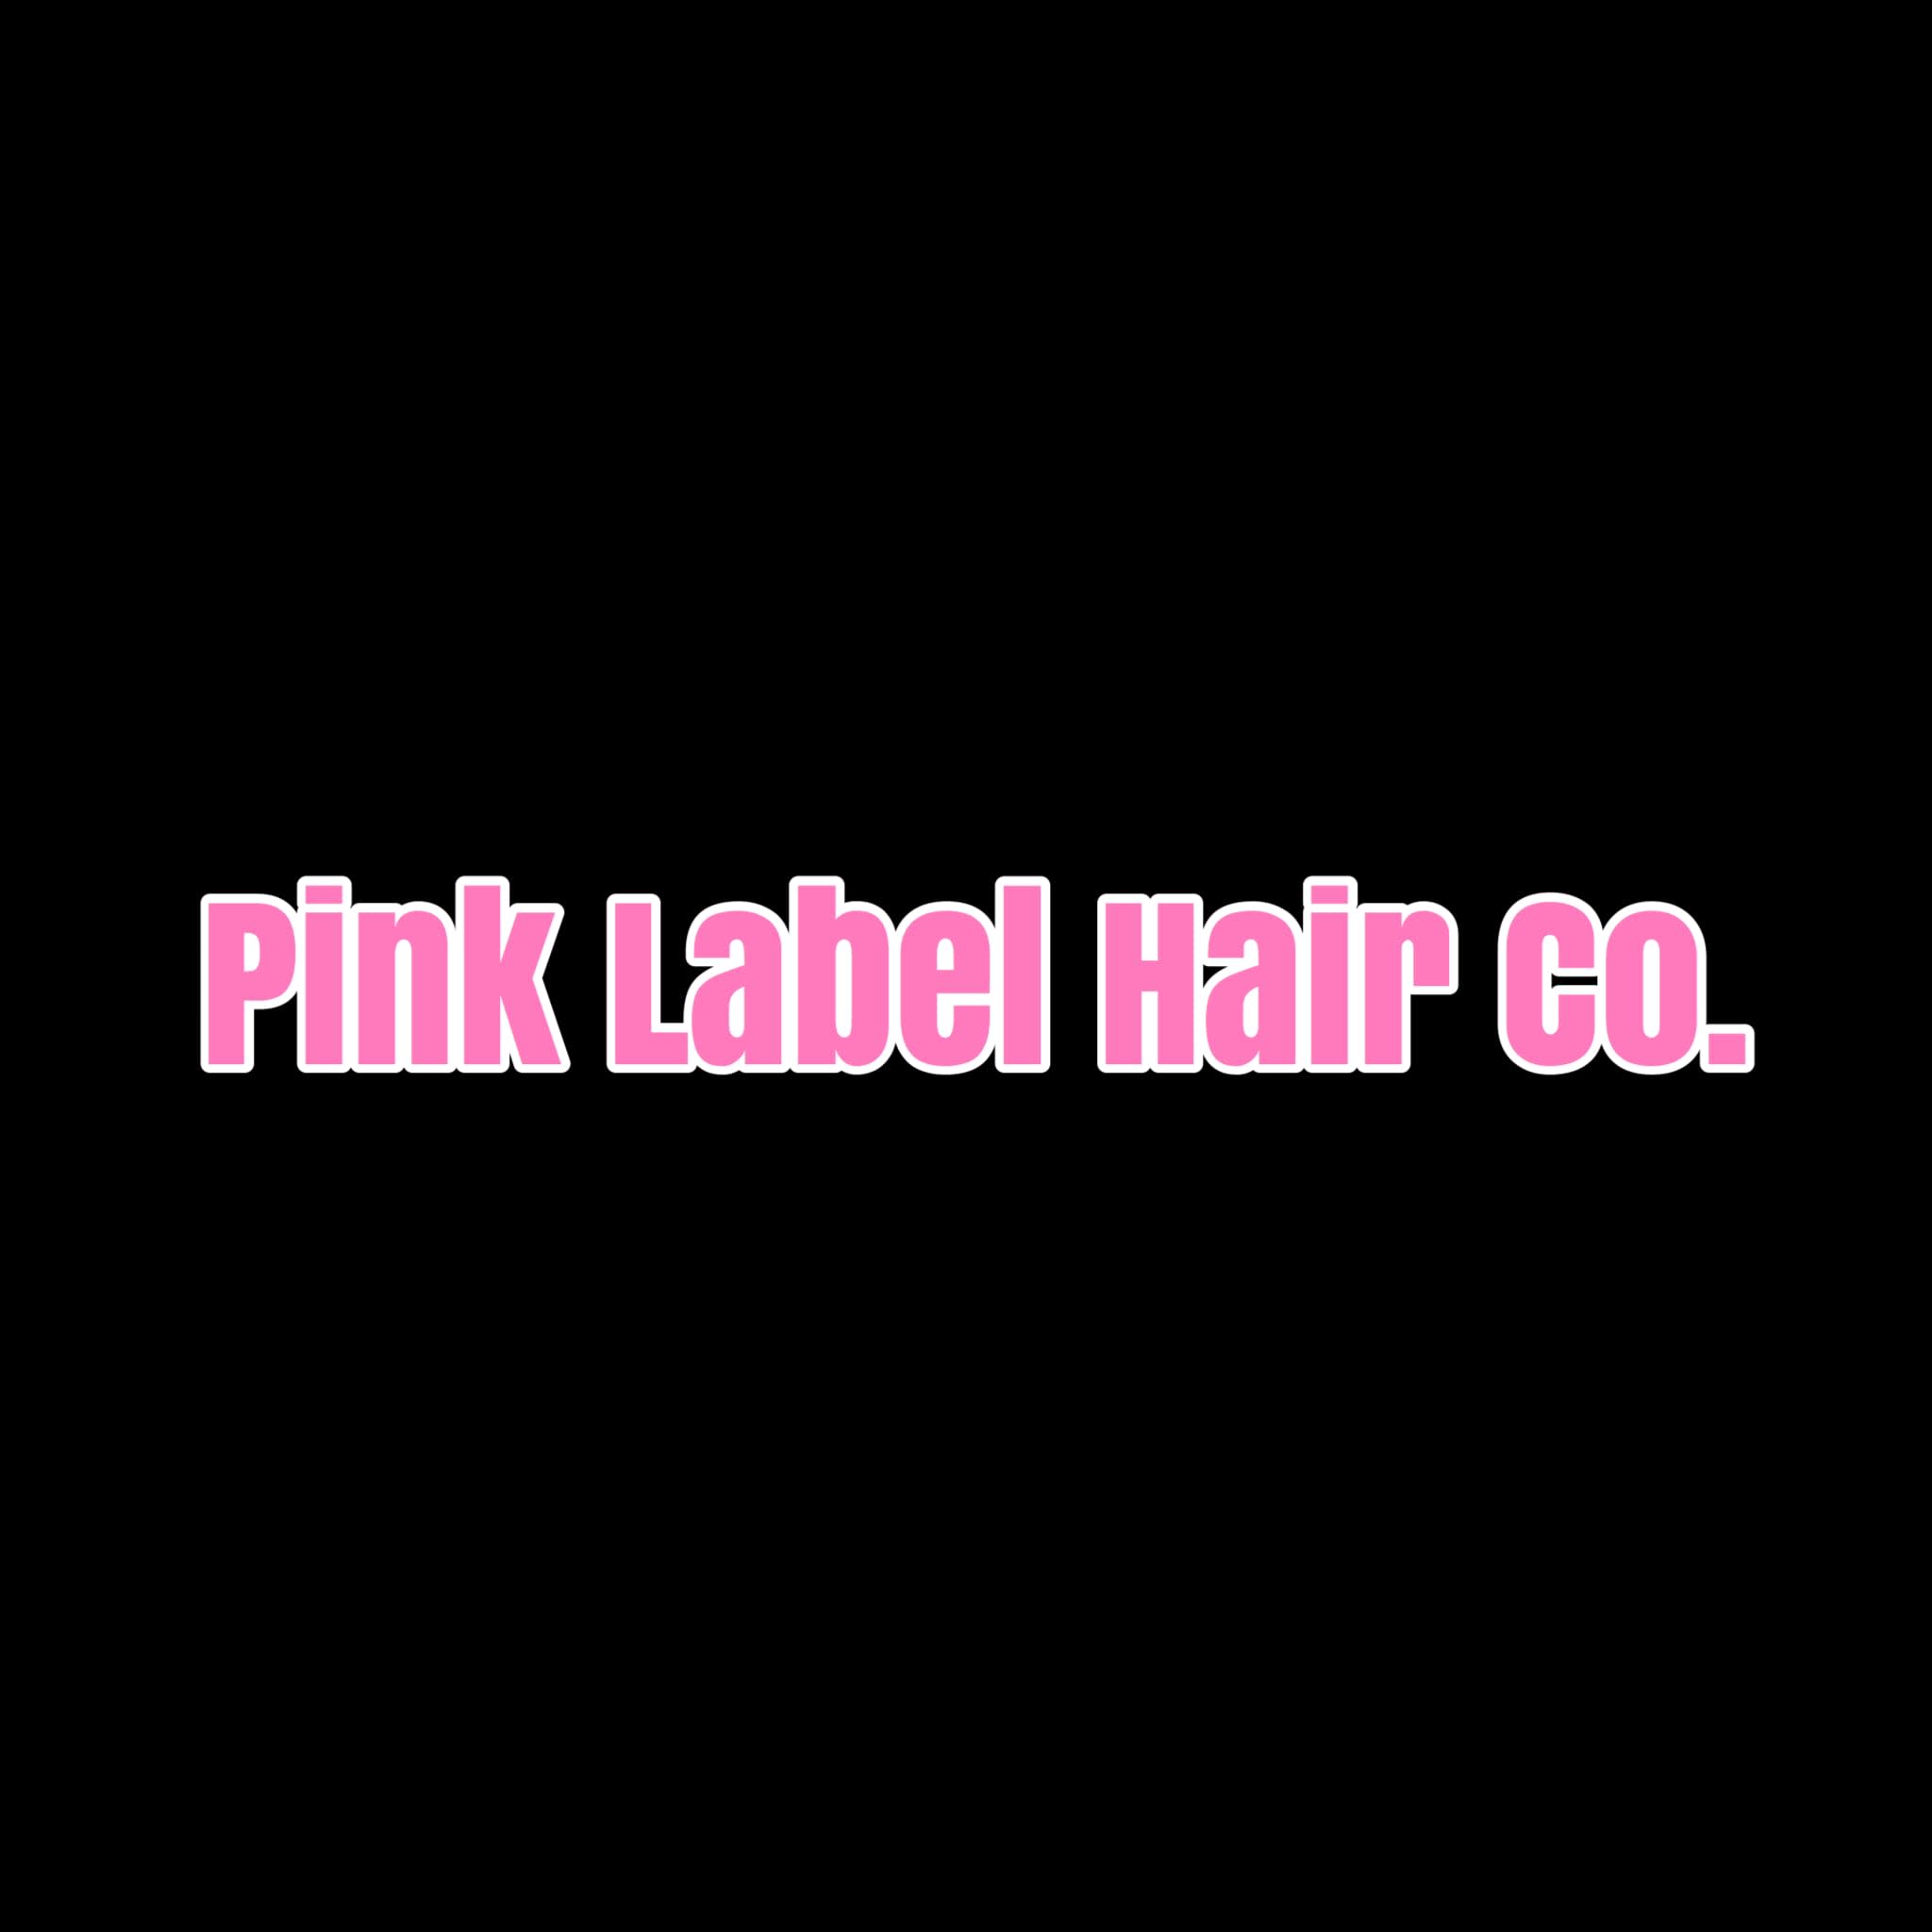 Pink Label Hair Co